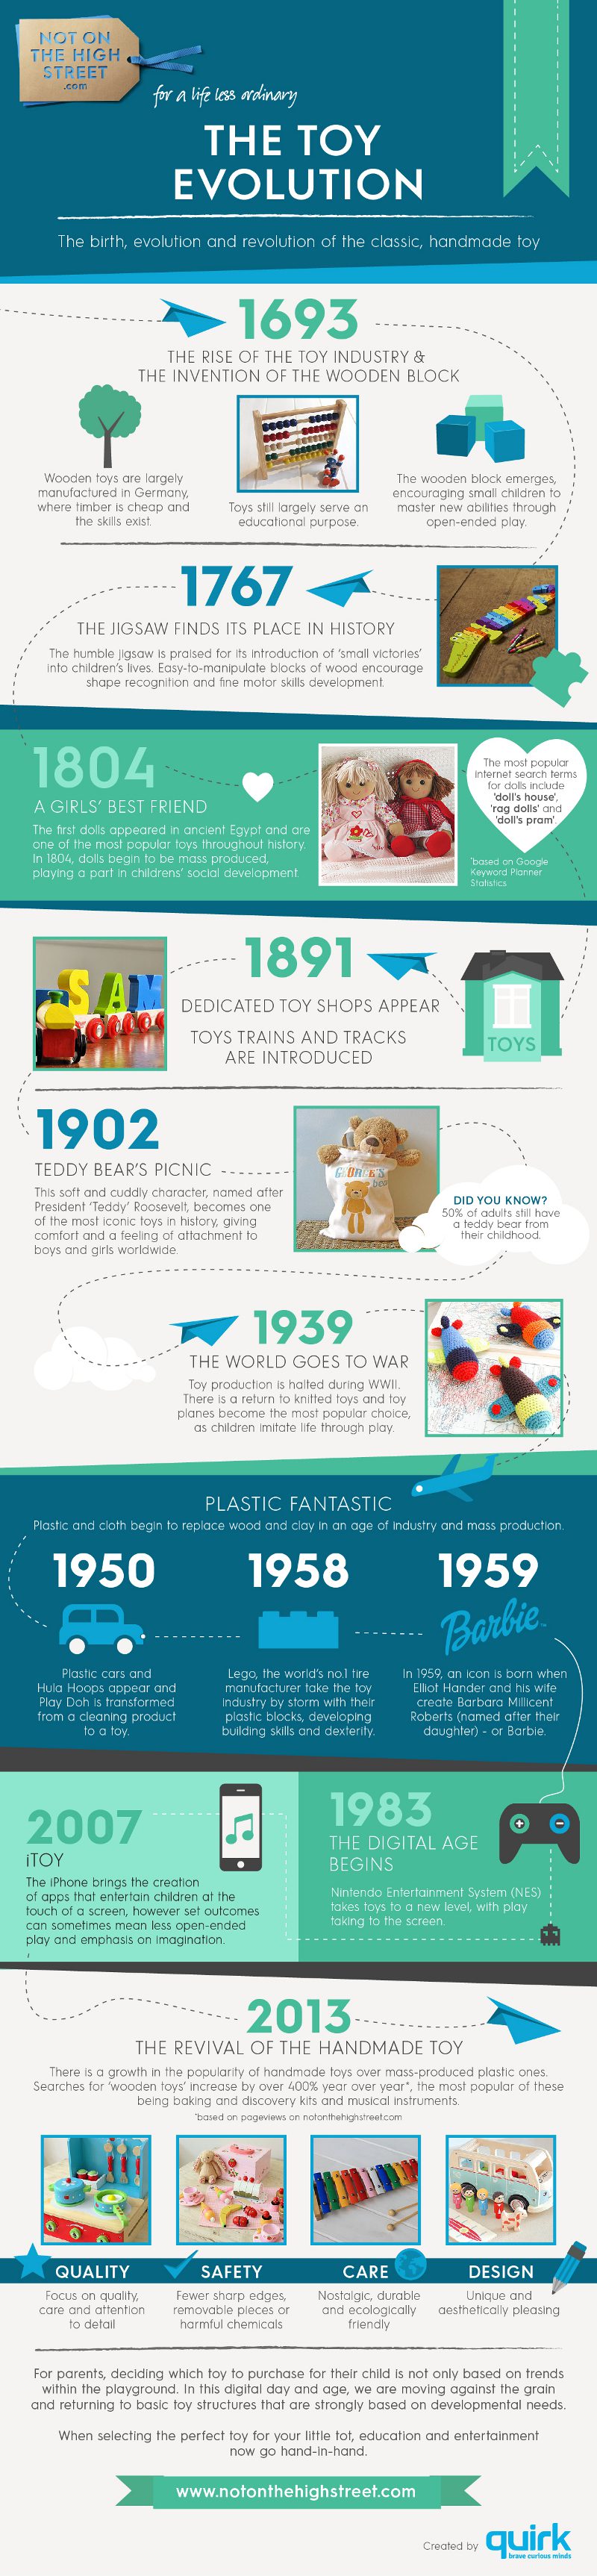 Toy Trends in History